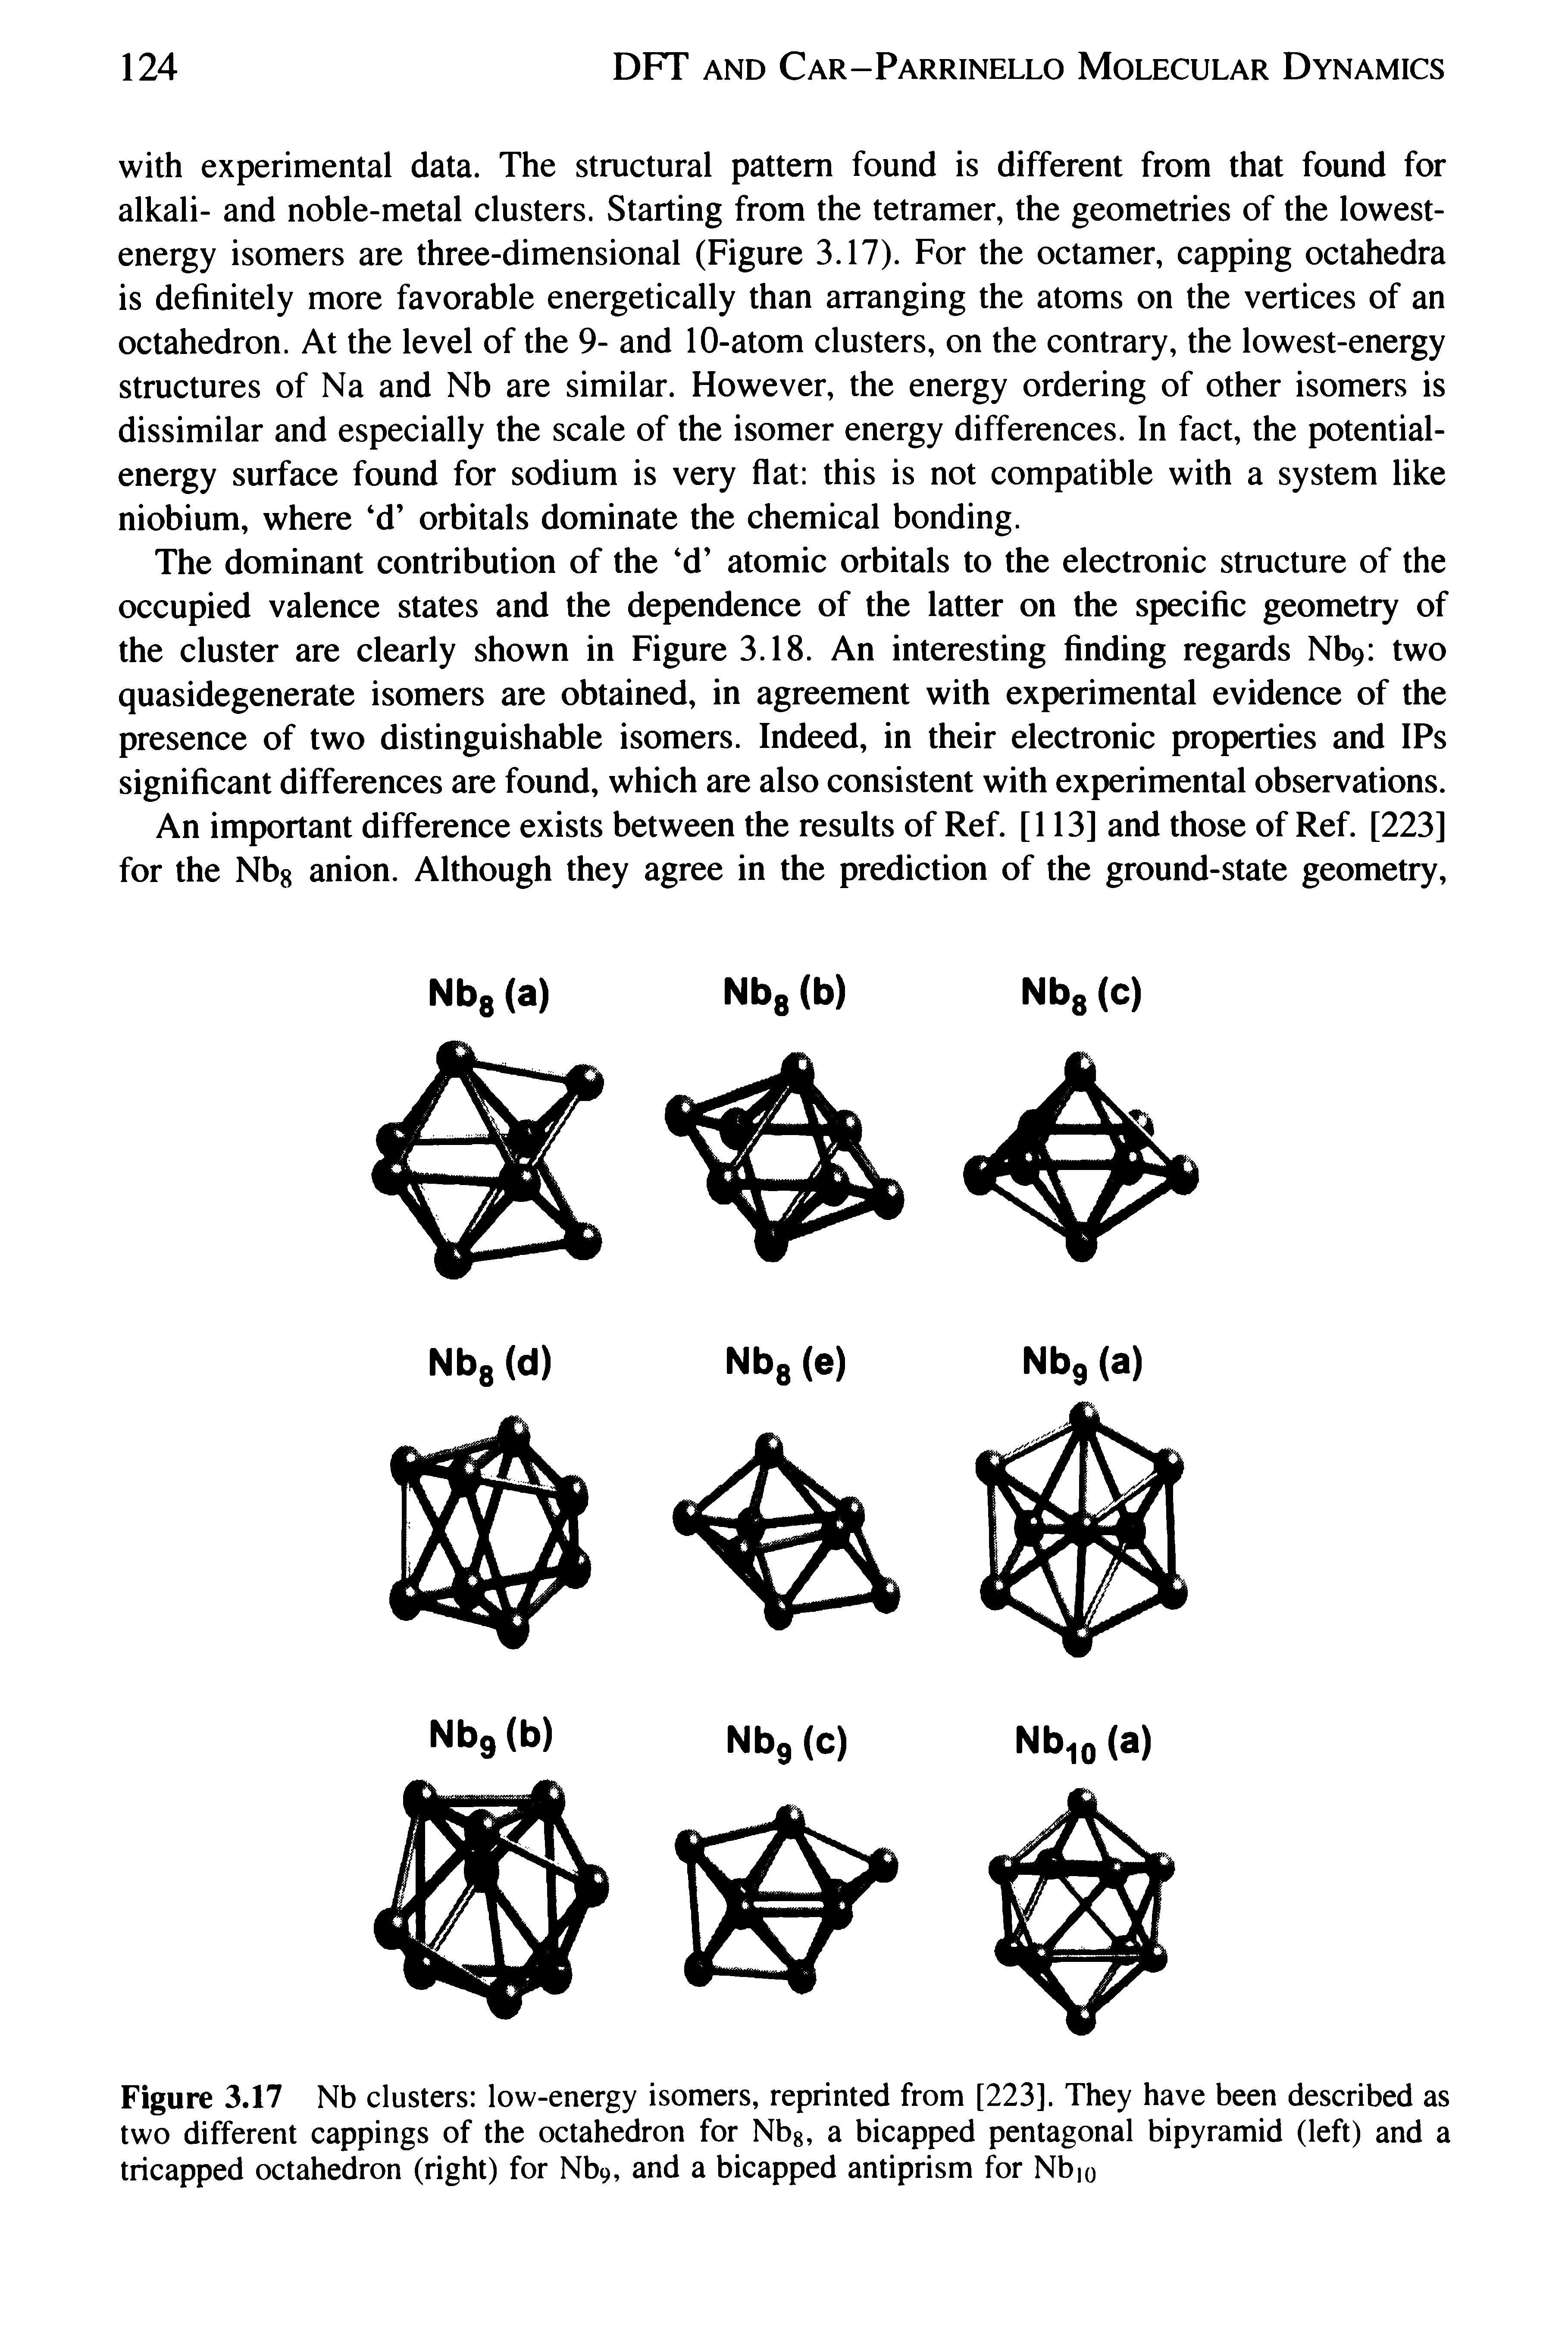 Figure 3.17 Nb clusters low-energy isomers, reprinted from [223]. They have been described as two different cappings of the octahedron for Nbg, a bicapped pentagonal bipyramid (left) and a tricapped octahedron (right) for Nb9, and a bicapped antiprism for Nbio...